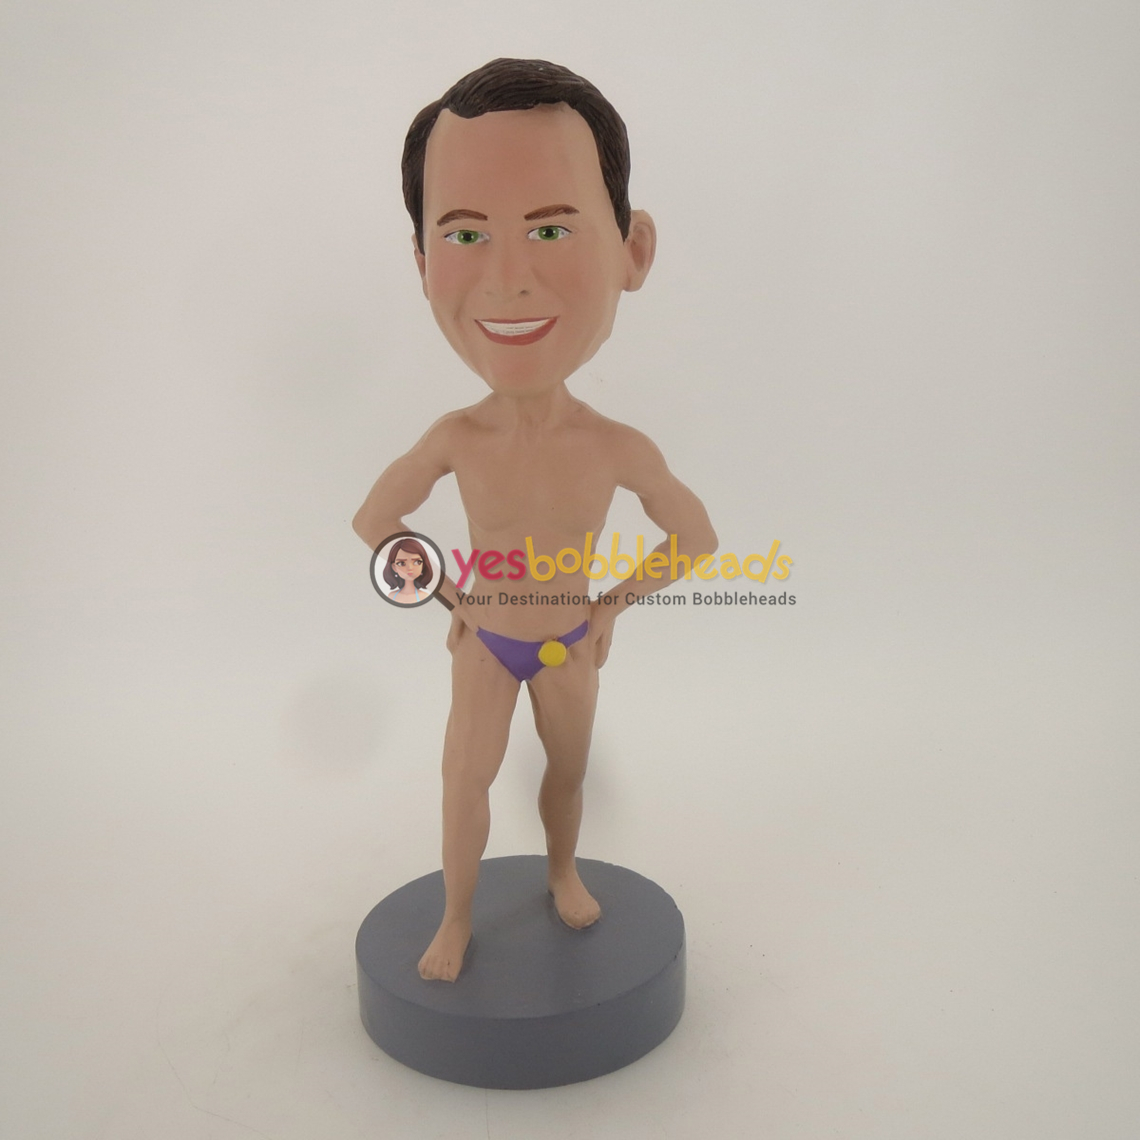 Picture of Custom Bobblehead Doll: Shirtless Muscle Man